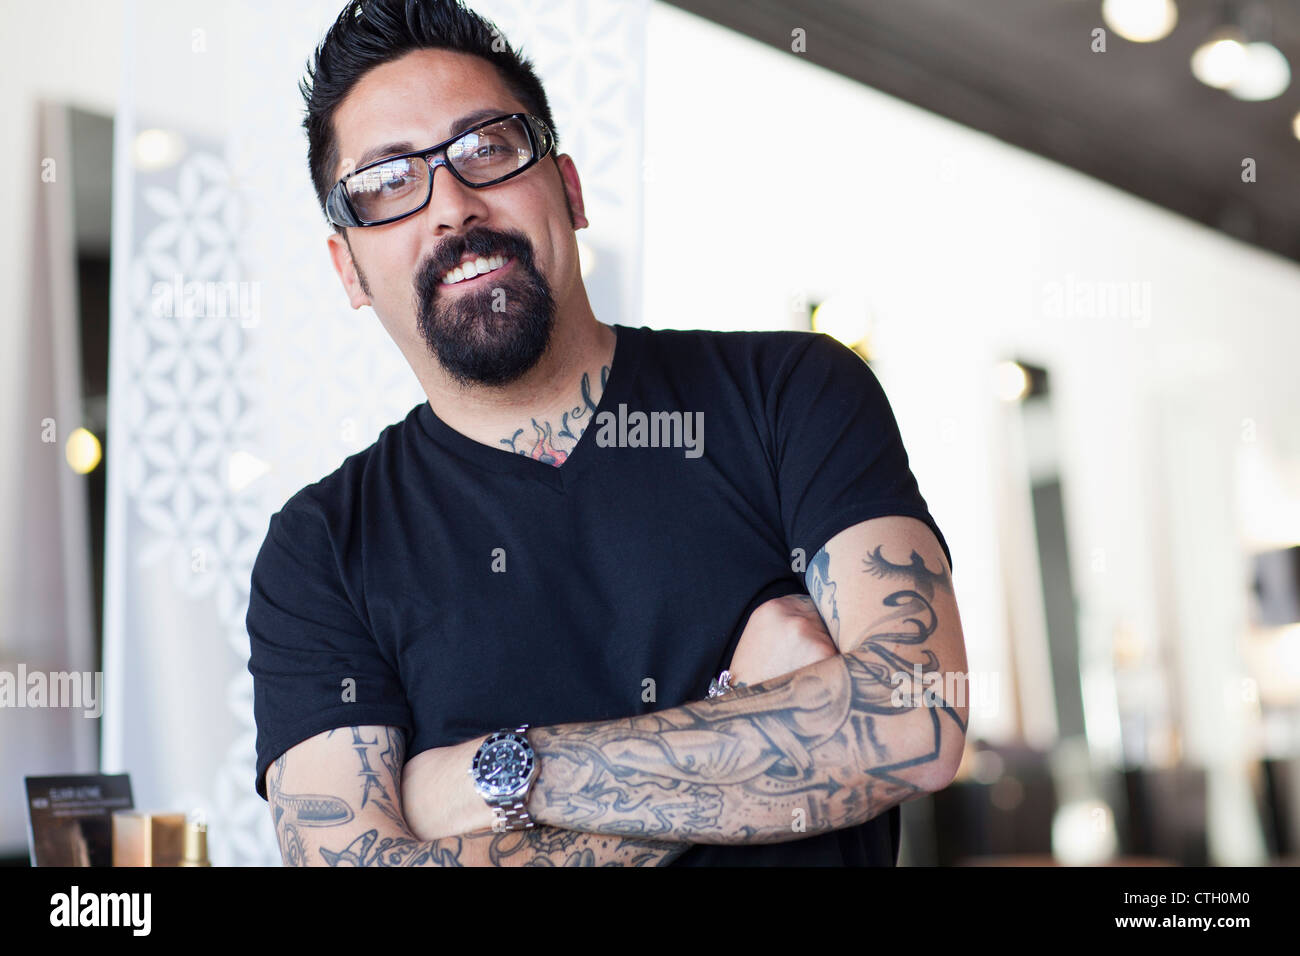 Hispanic man with tattoos Banque D'Images